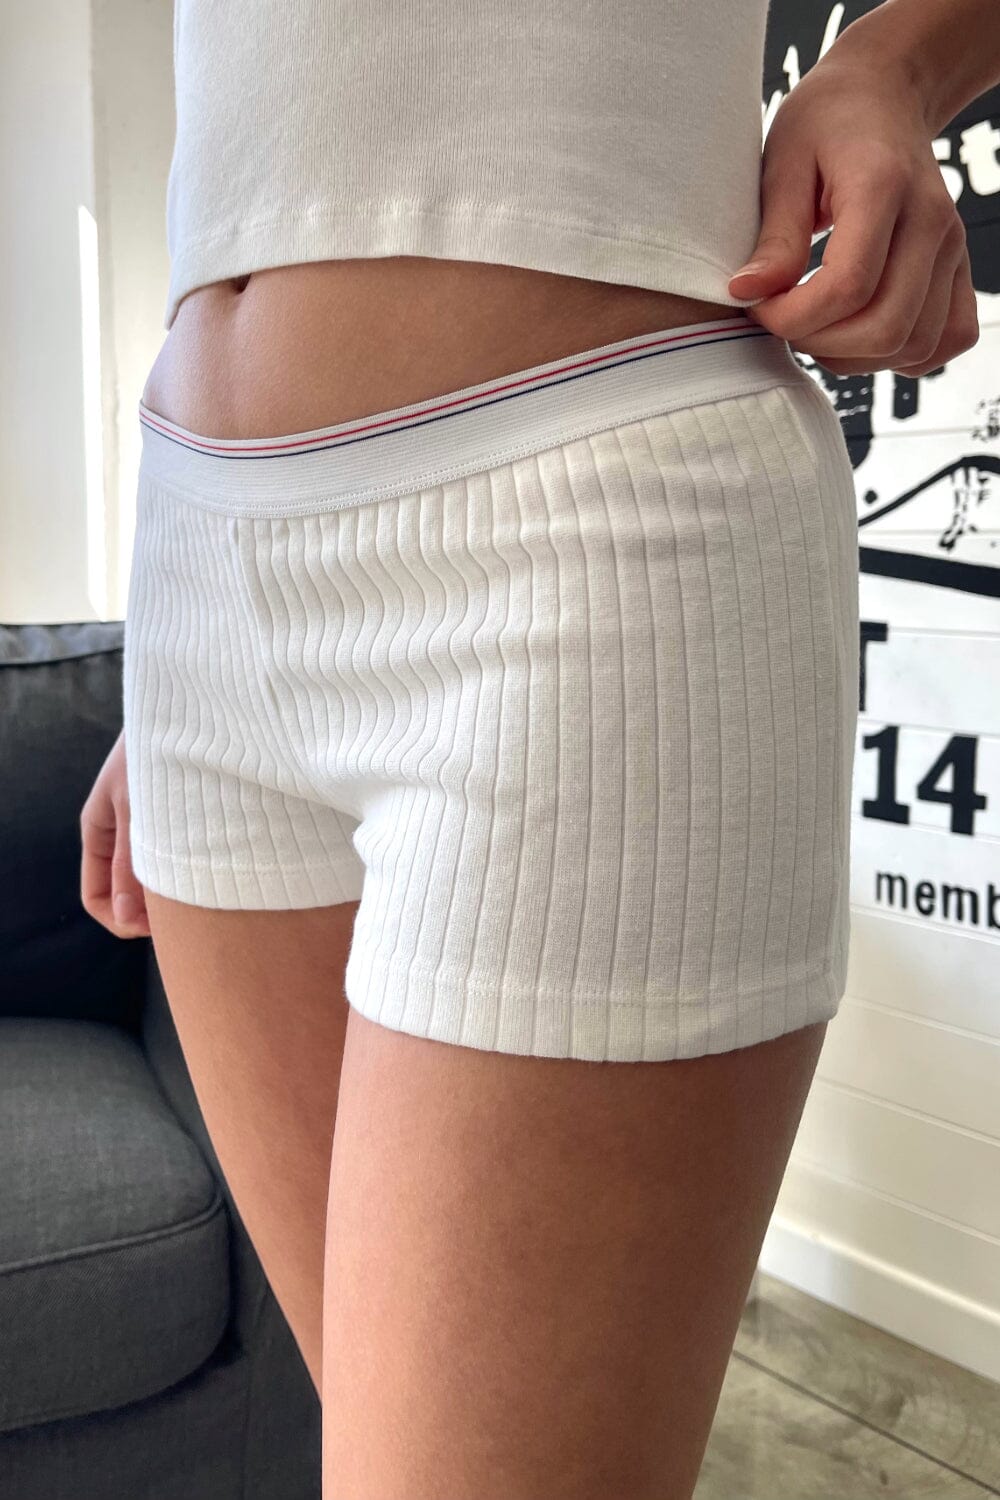 Brandy Melville bow boxer underwear Size XS - $26 New With Tags - From jo